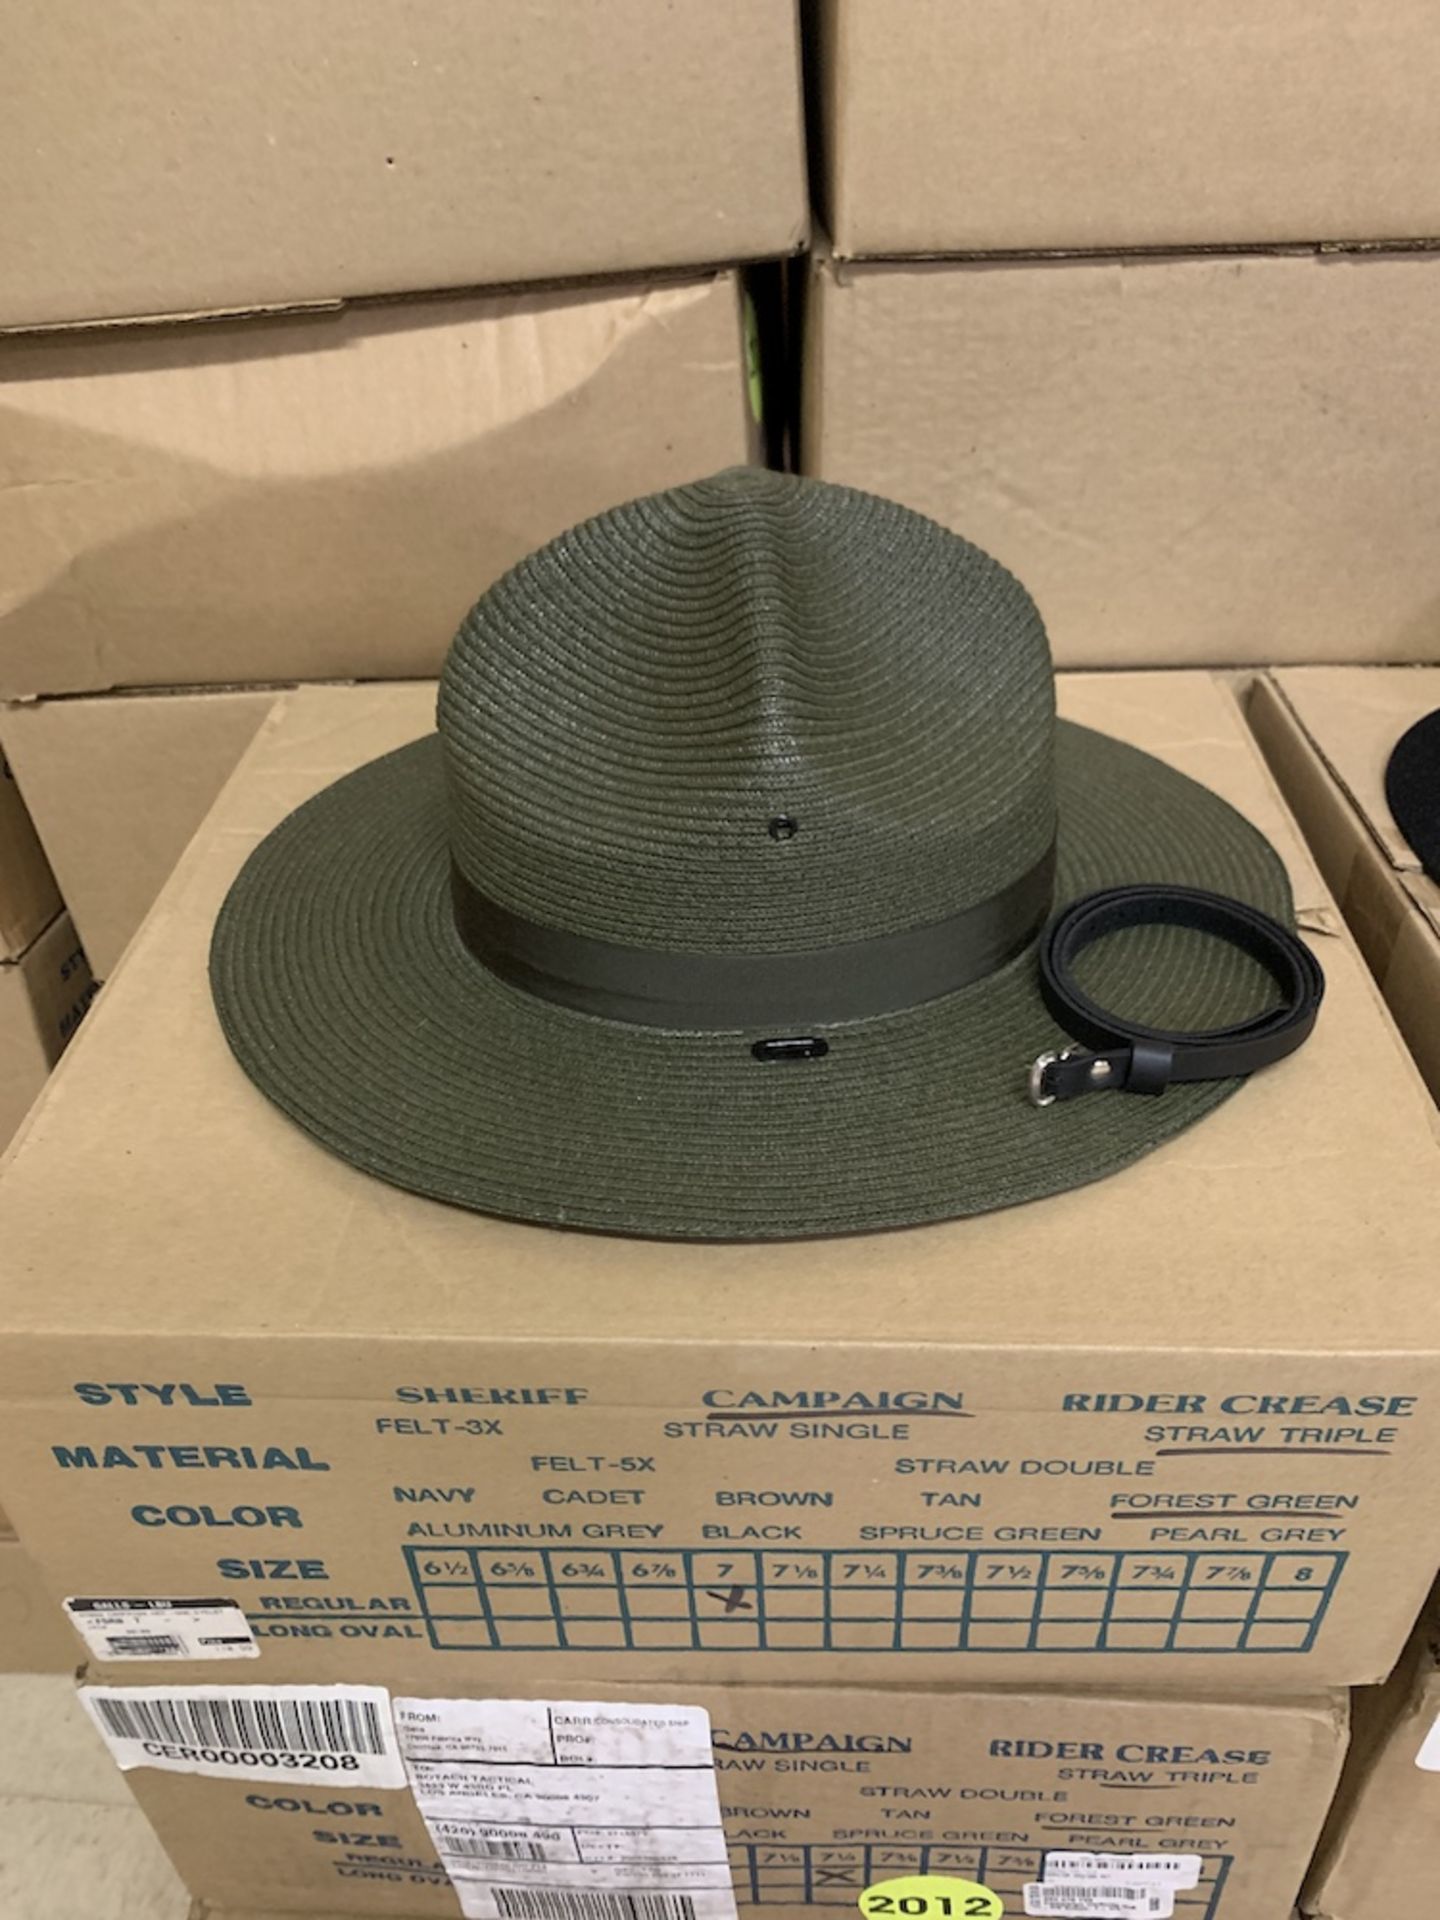 10 Campaign Uniform Hats, 9 The Lawman in Forest Green, 1 Campaign Black Felt Beaver Quality, New - Image 3 of 7